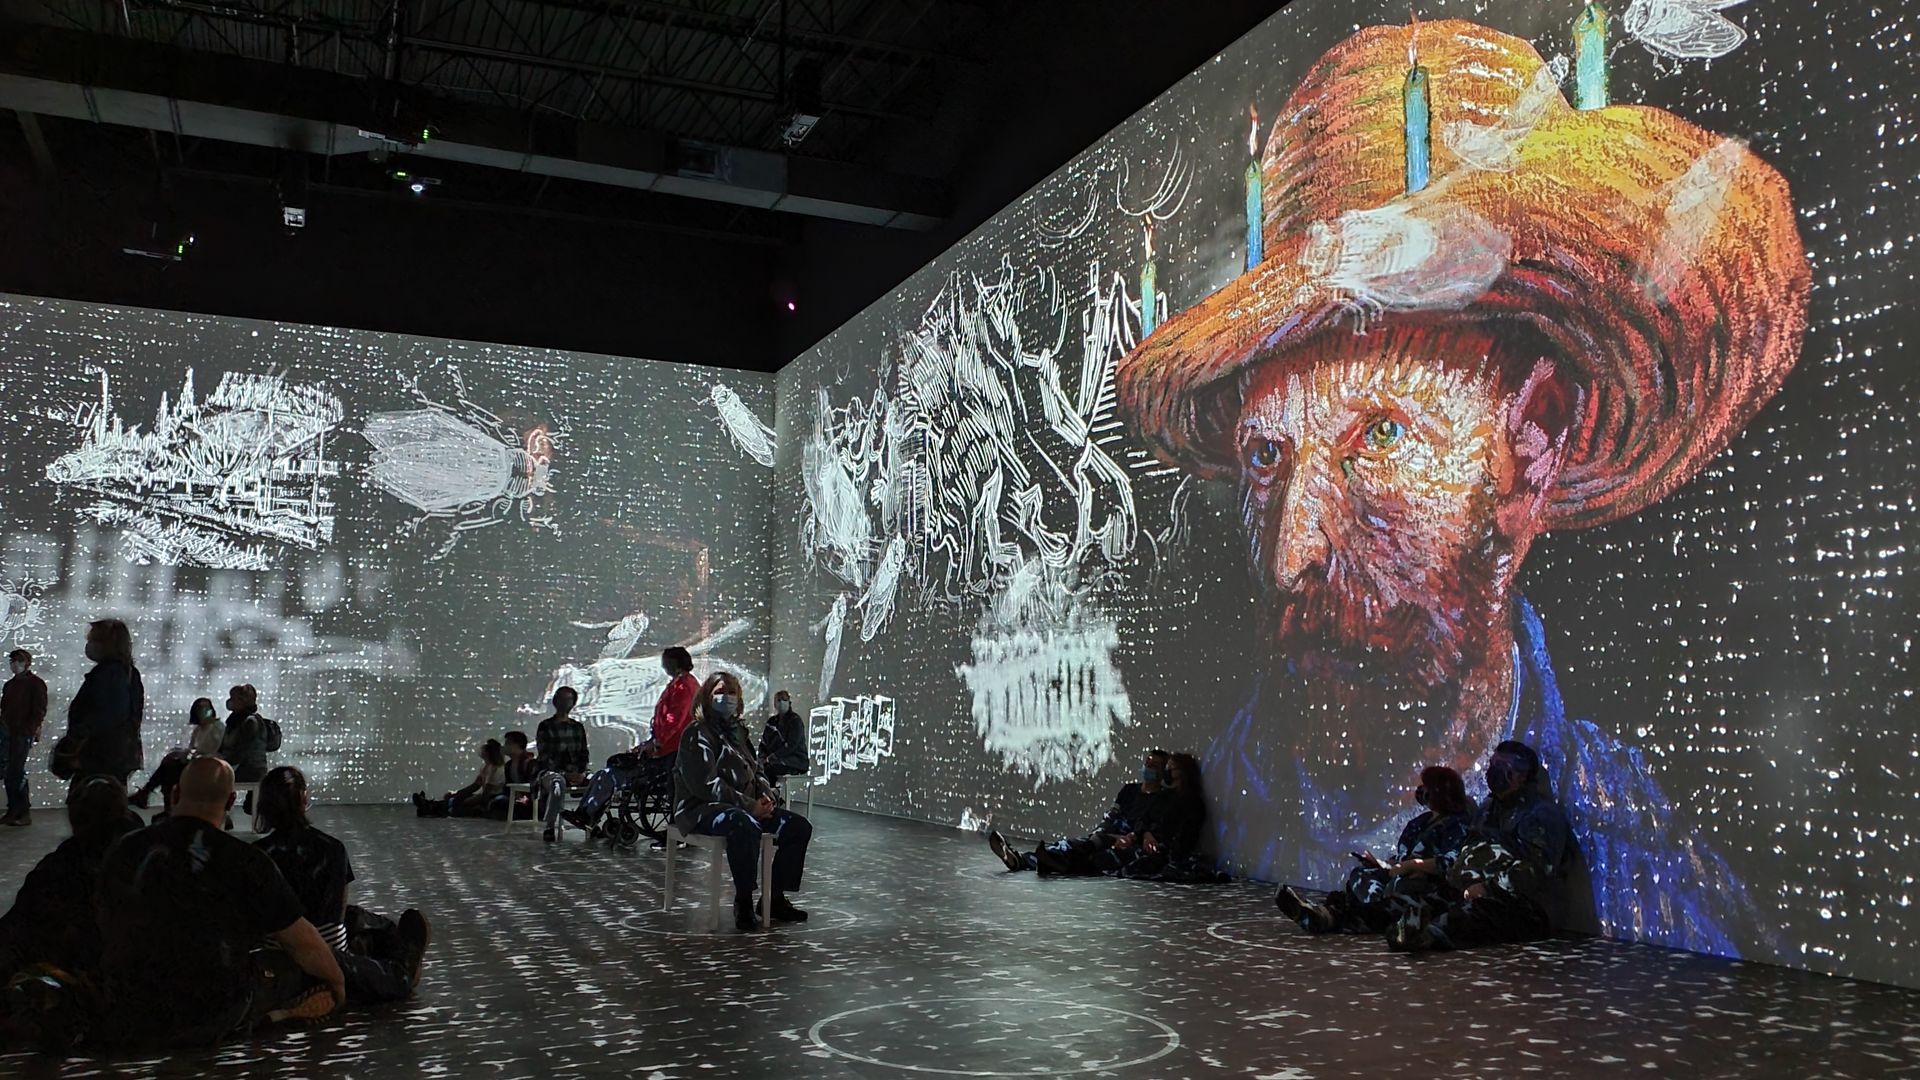 A portrait of Van Gogh is projected onto a wall while people sit on benches and the floor observing it